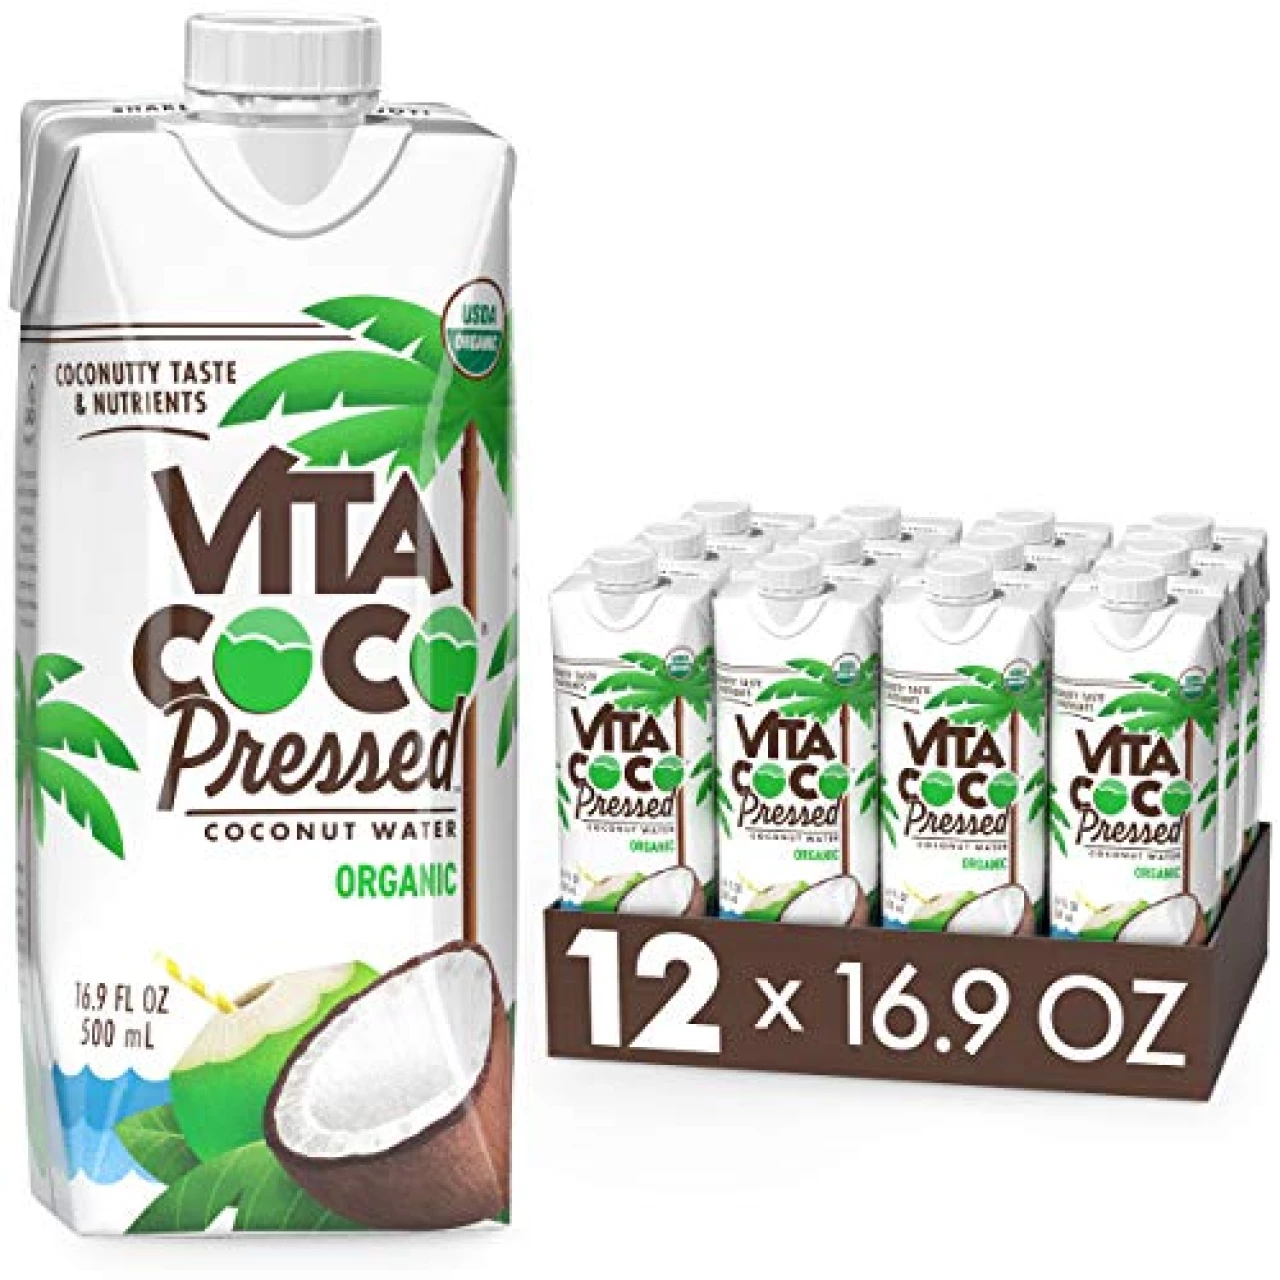 Vita Coco Organic Coconut Water, Pressed, More &ldquo;Coconutty&rdquo; Flavor, Natural Electrolytes, Vital Nutrients, 16.9 Fl Oz (Pack of 12)